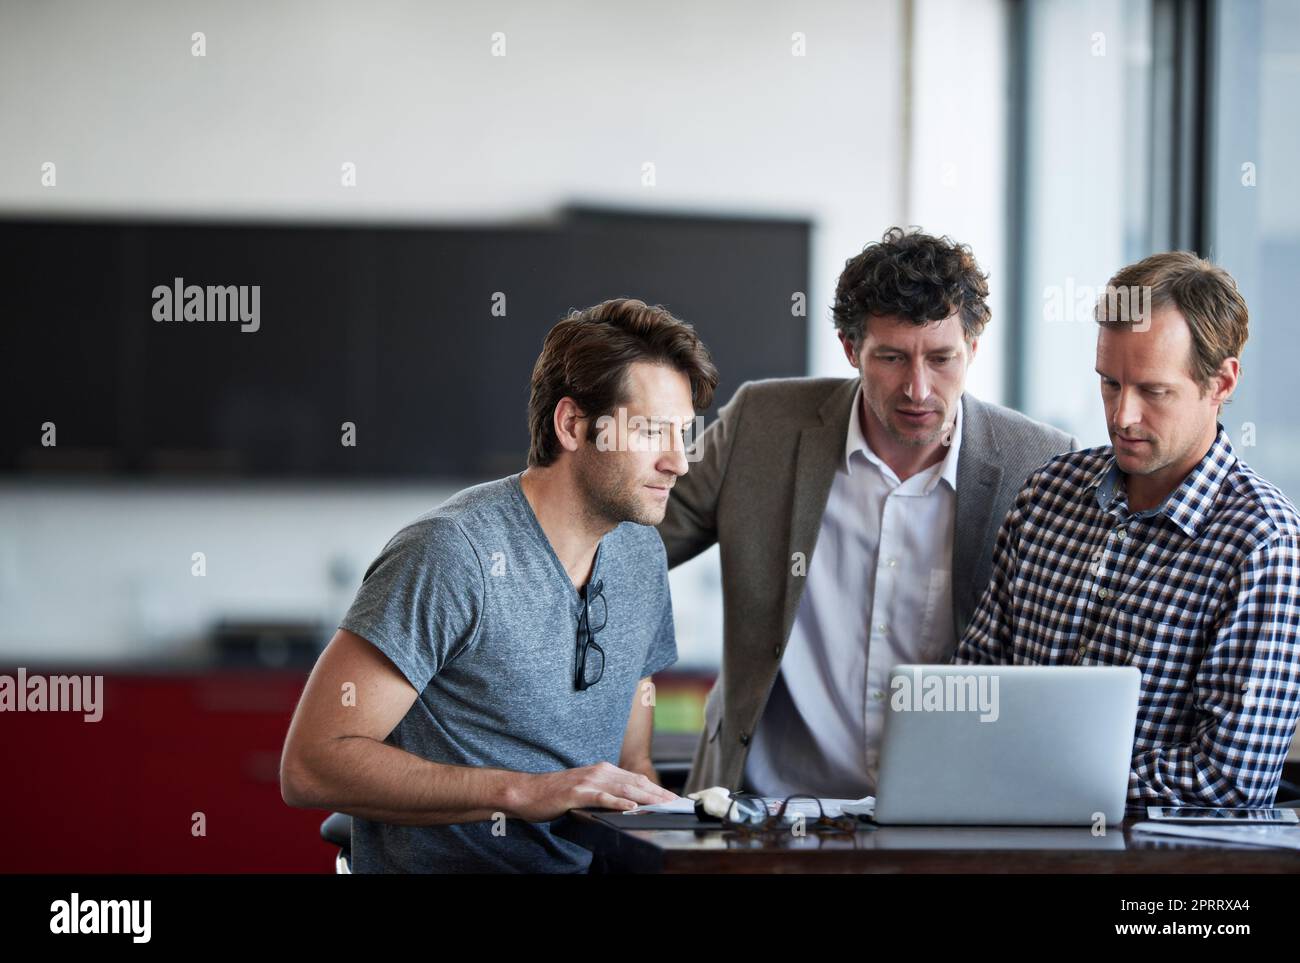 Its almost perfect. three businessman discussing work in the office. Stock Photo